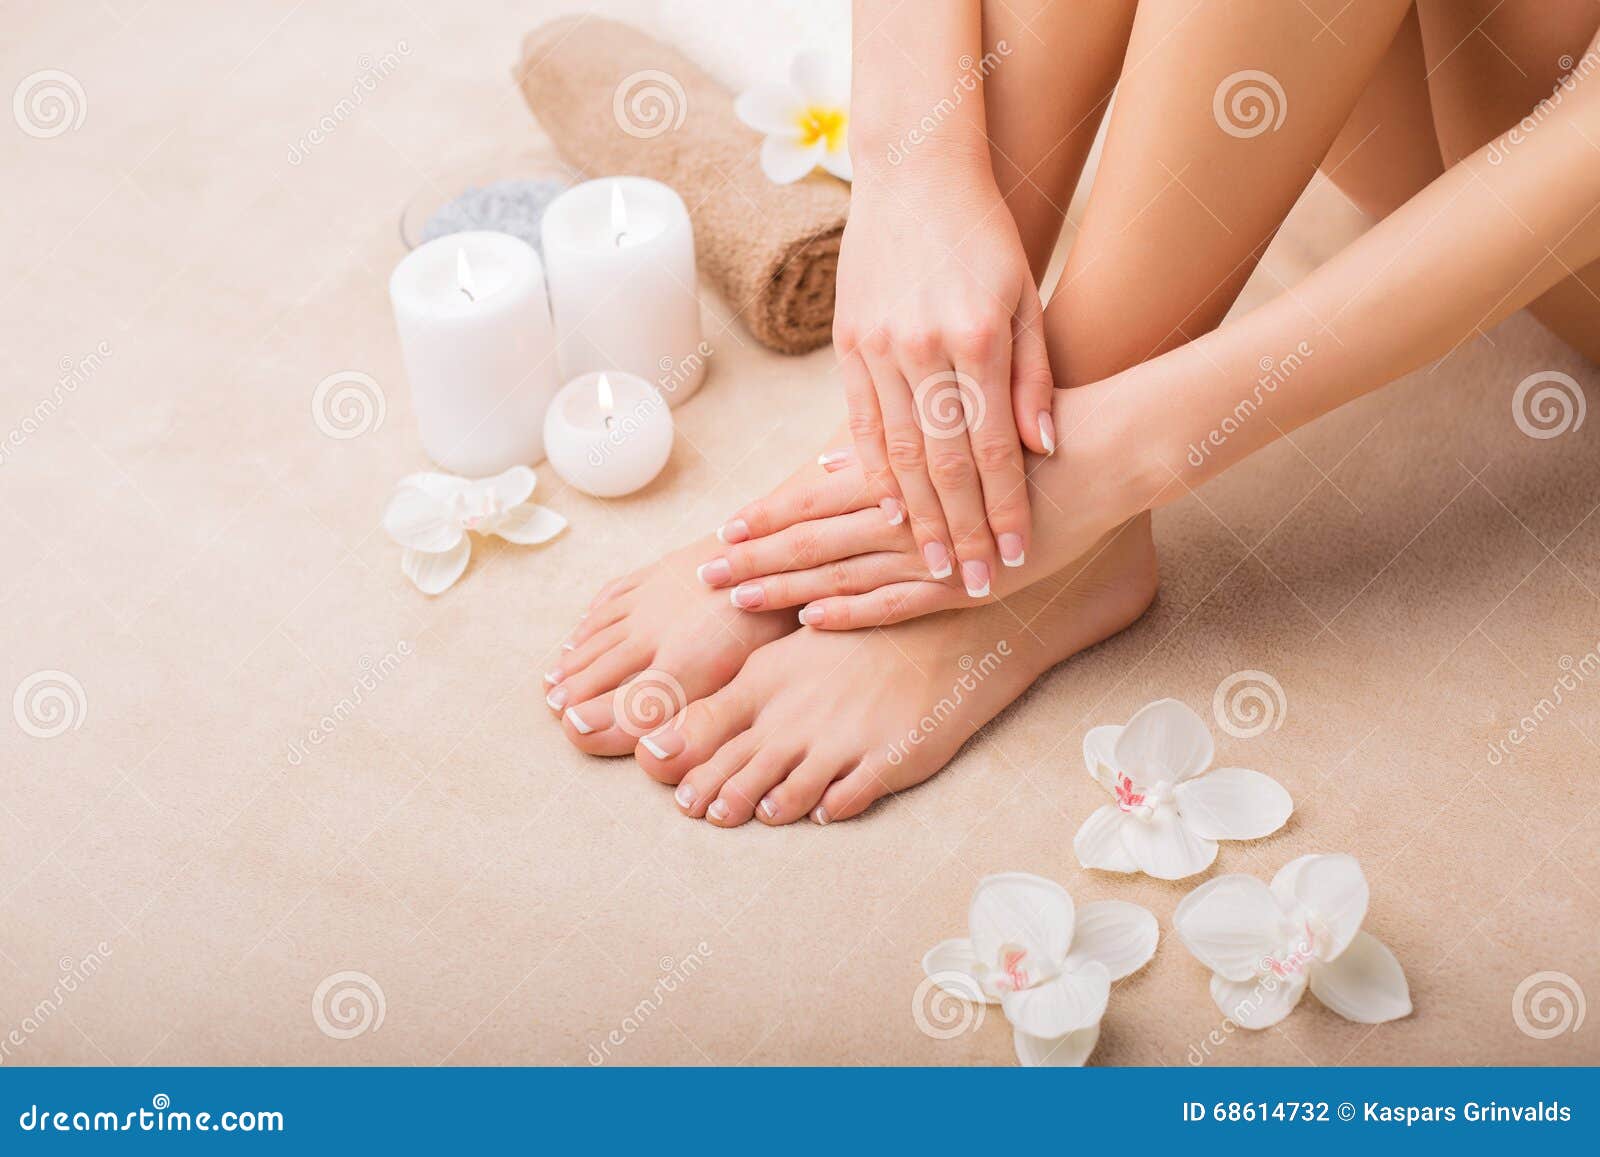 woman at spa with done manicure and pedicure